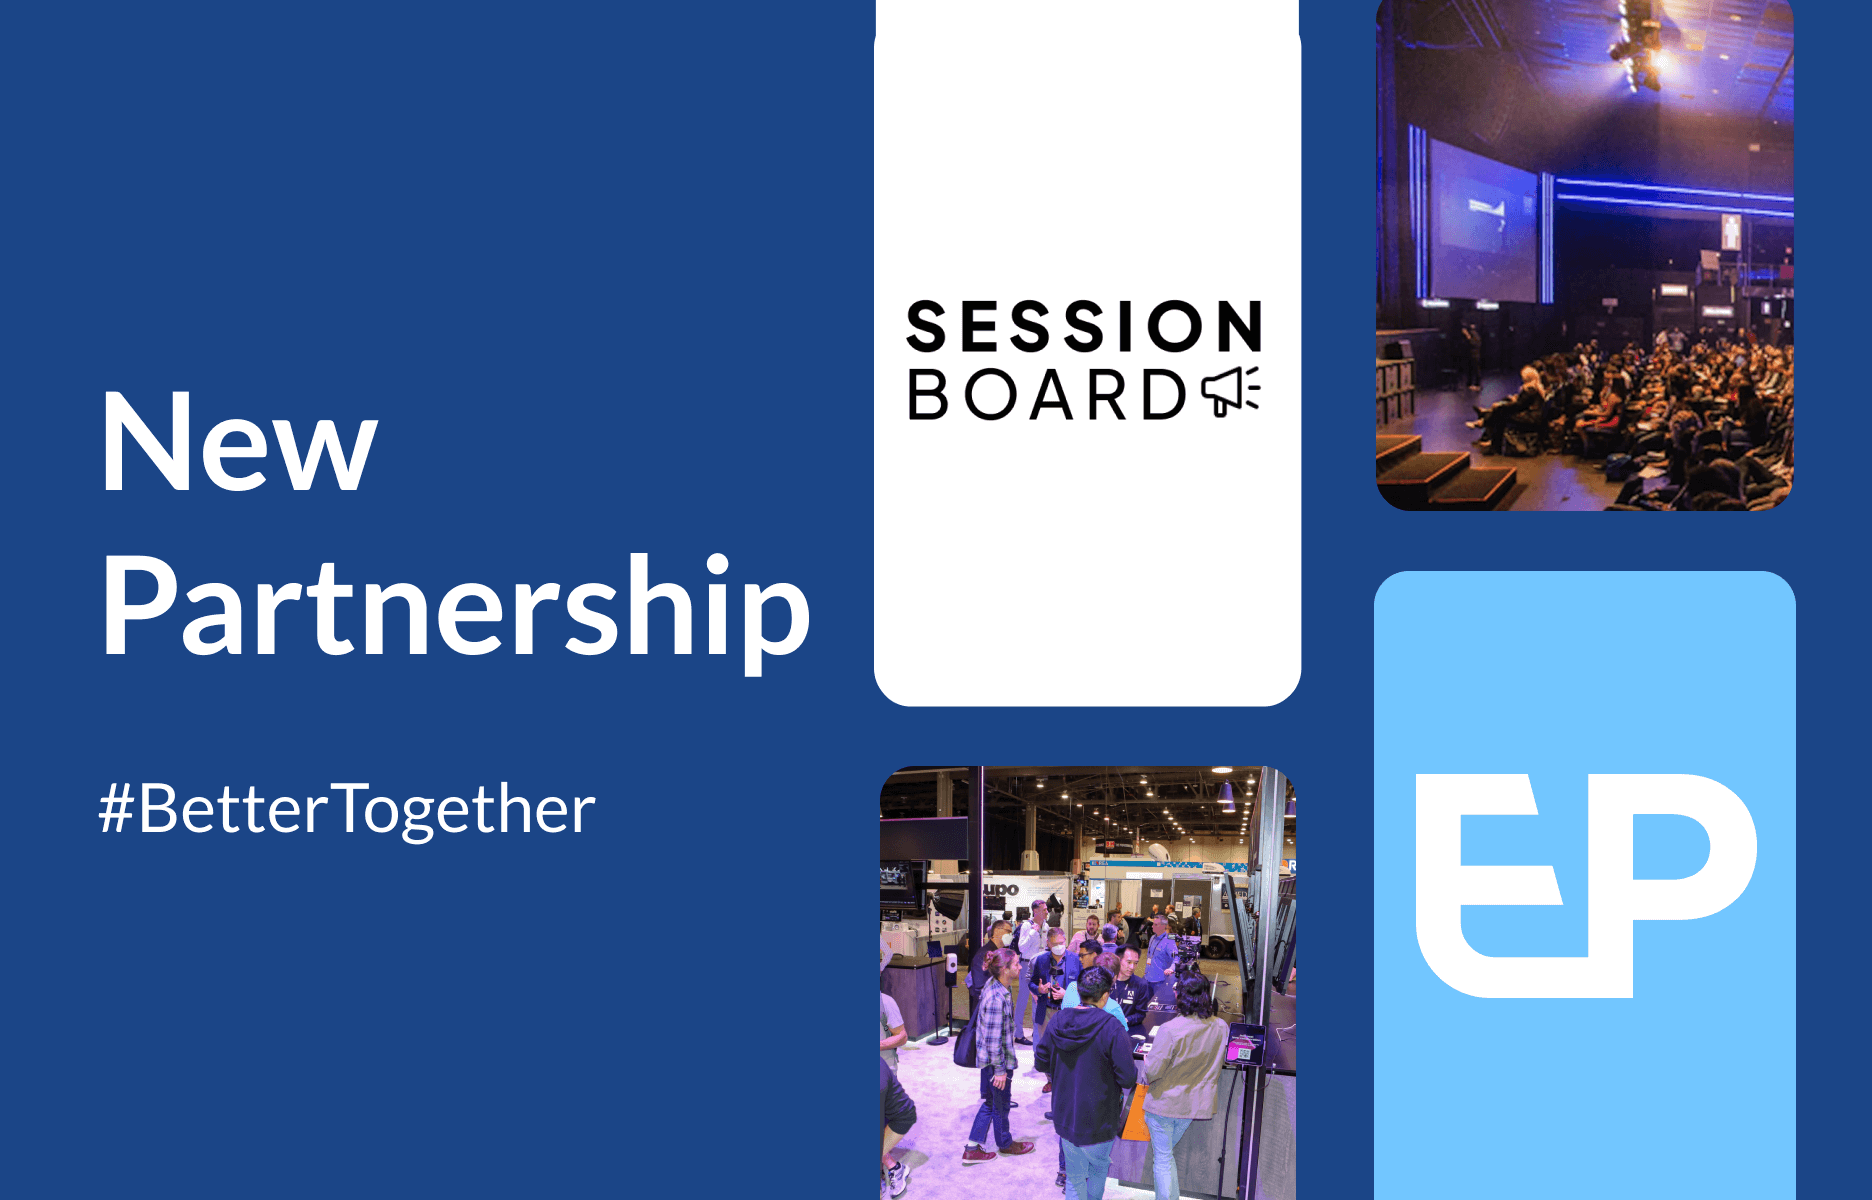 ExpoPlatform partners with Sessionboard